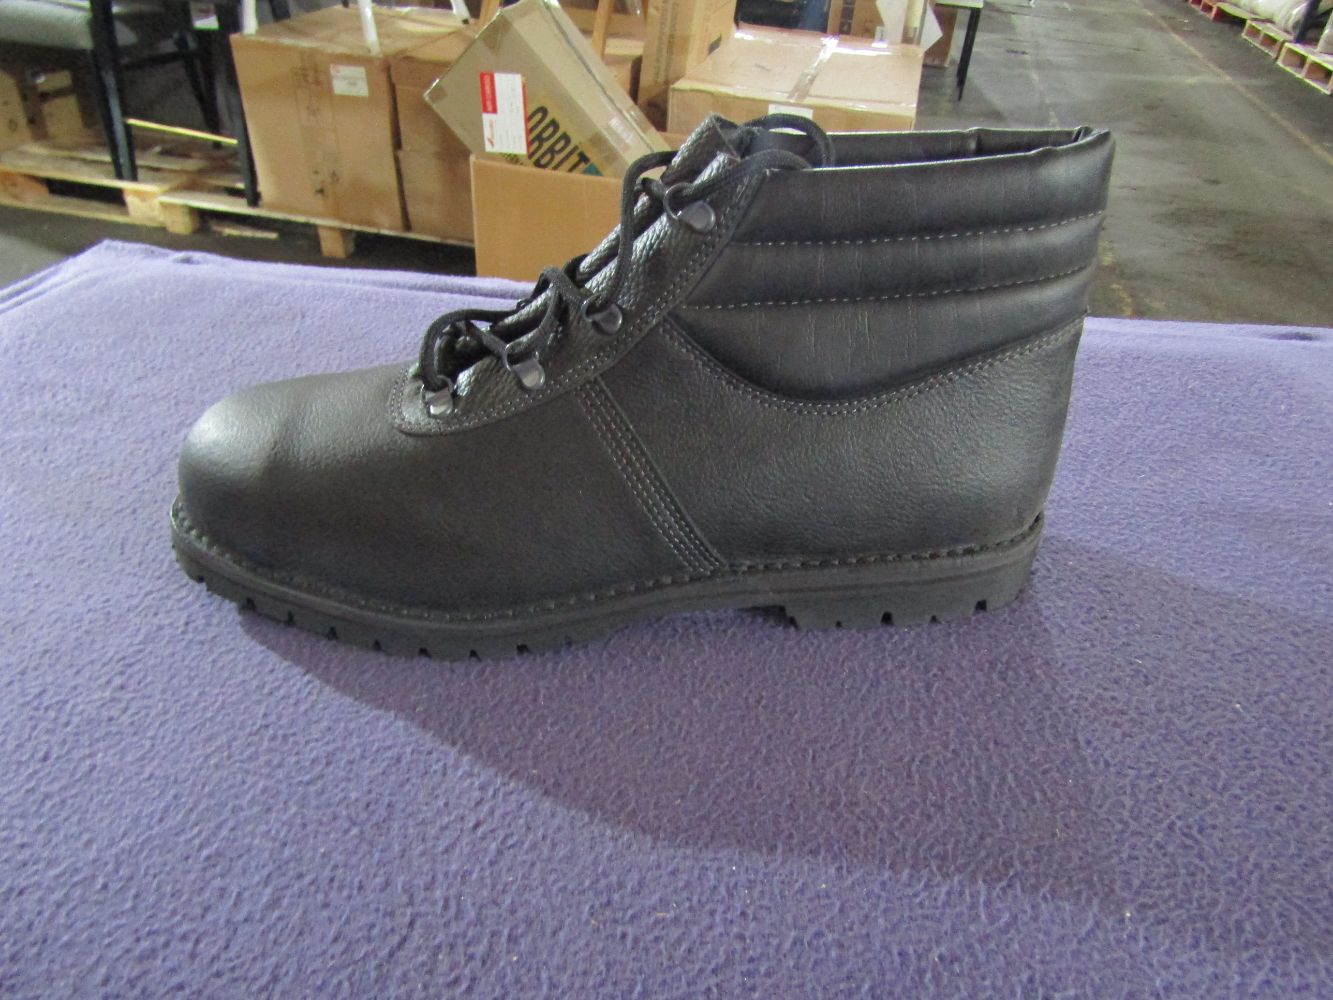 Workwear - Steel-Toe Cap Boots, Trainers, Clothing & More!